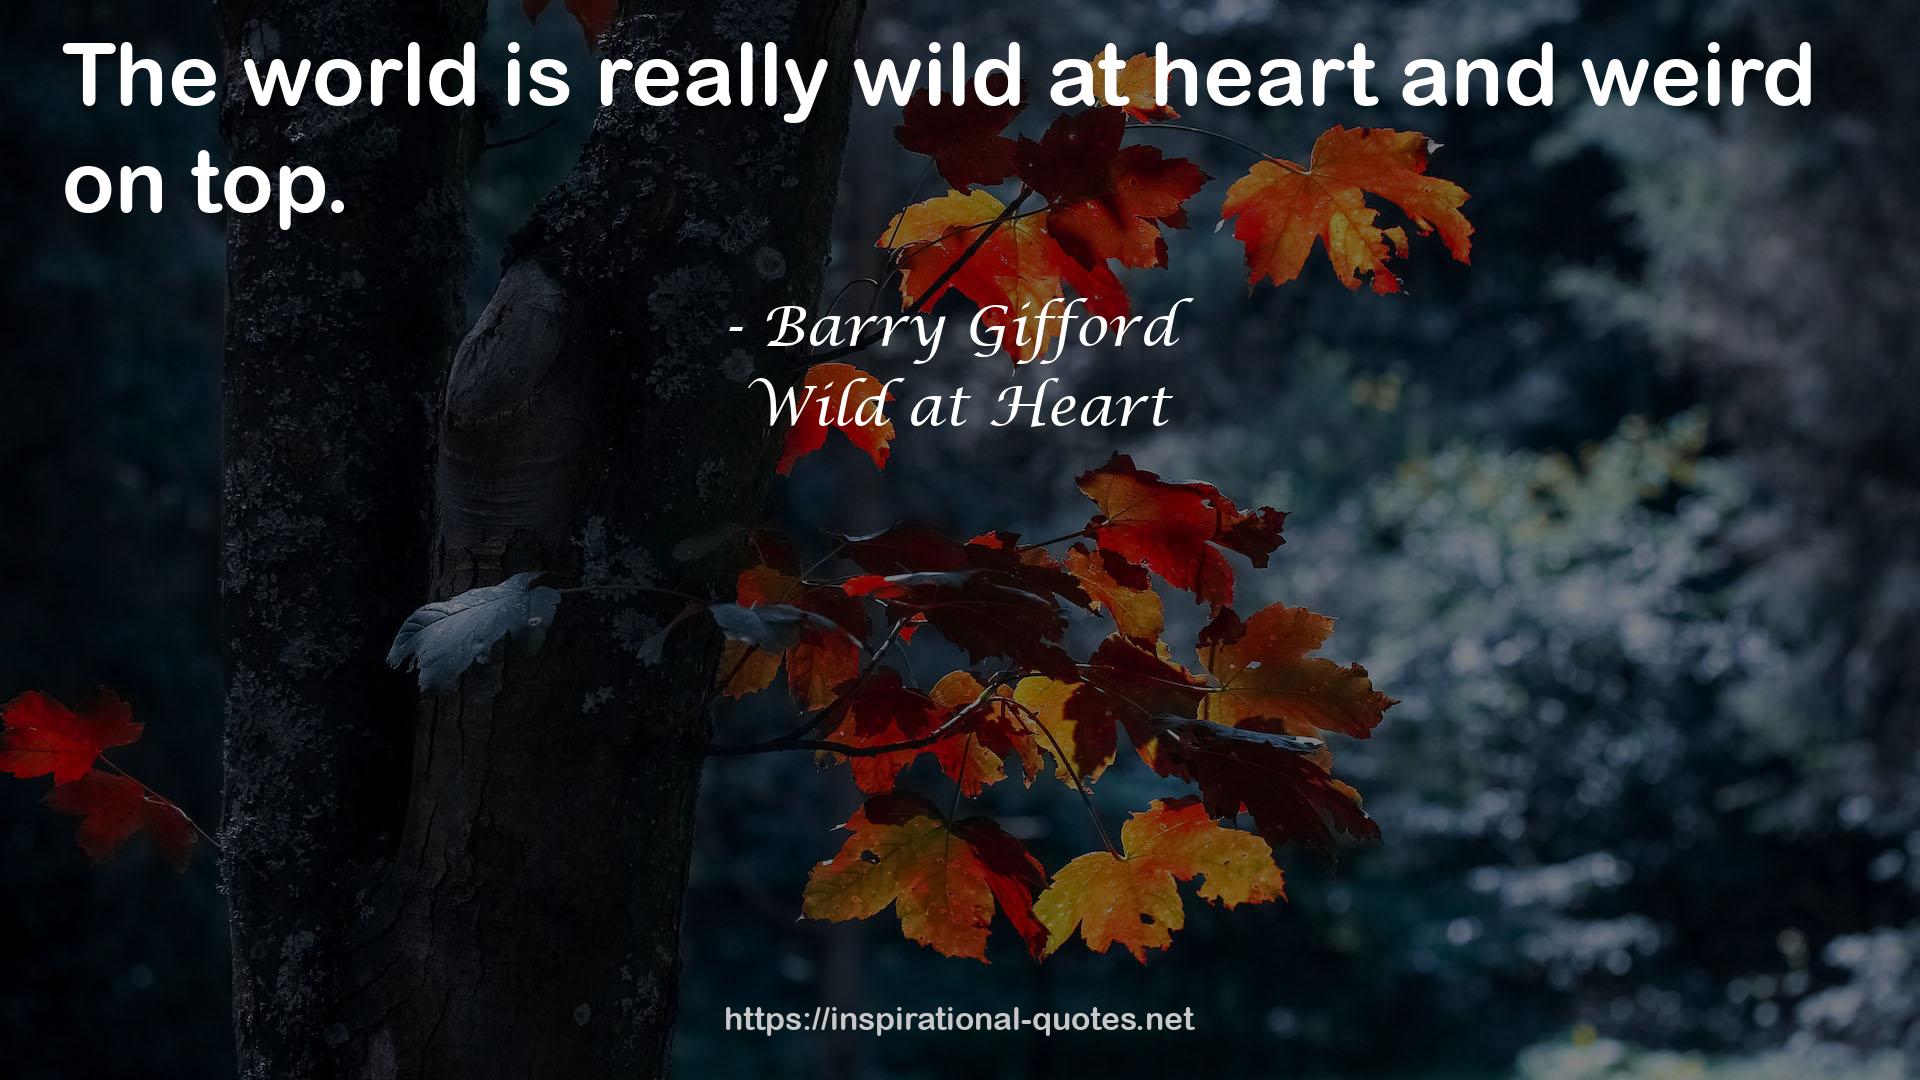 Wild at Heart QUOTES